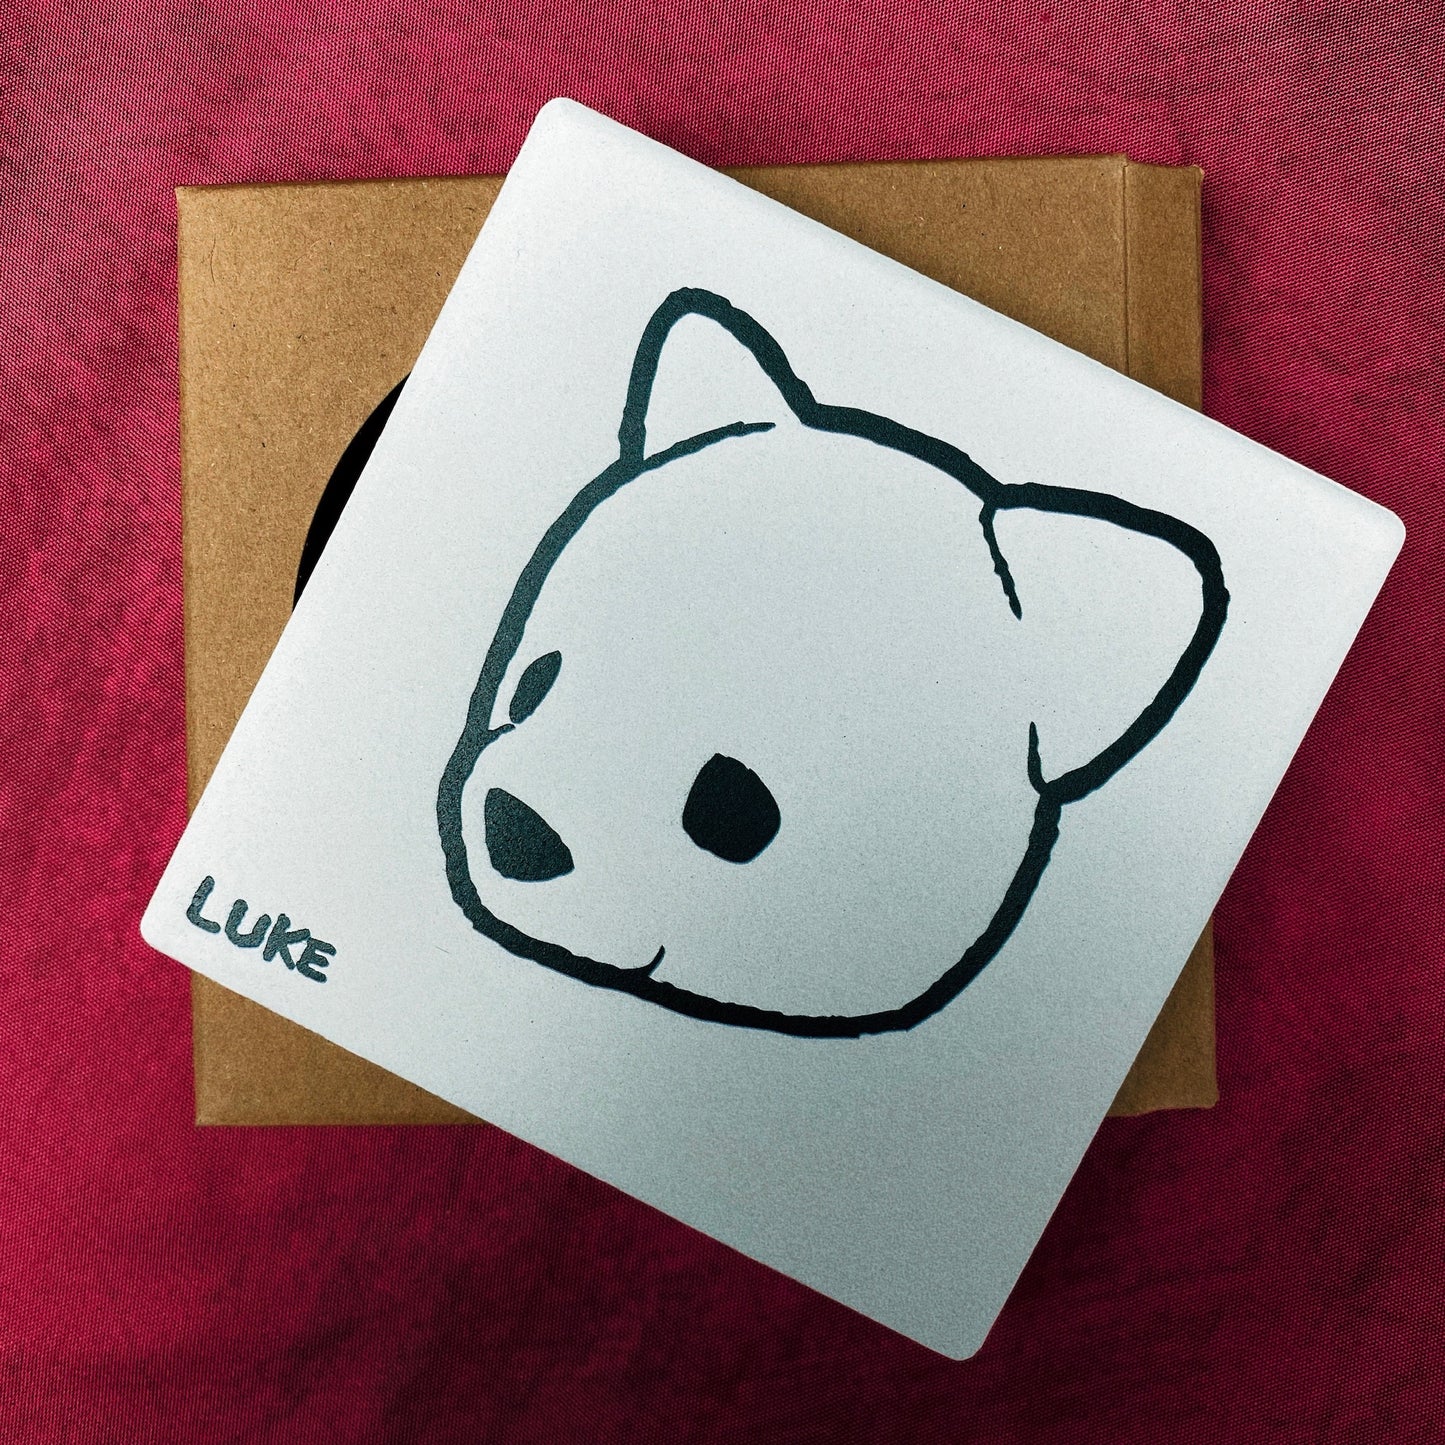 Ceramic coaster featuring Luke Chueh's bear head. Limited-edition of 100 published by Plush Art Club.